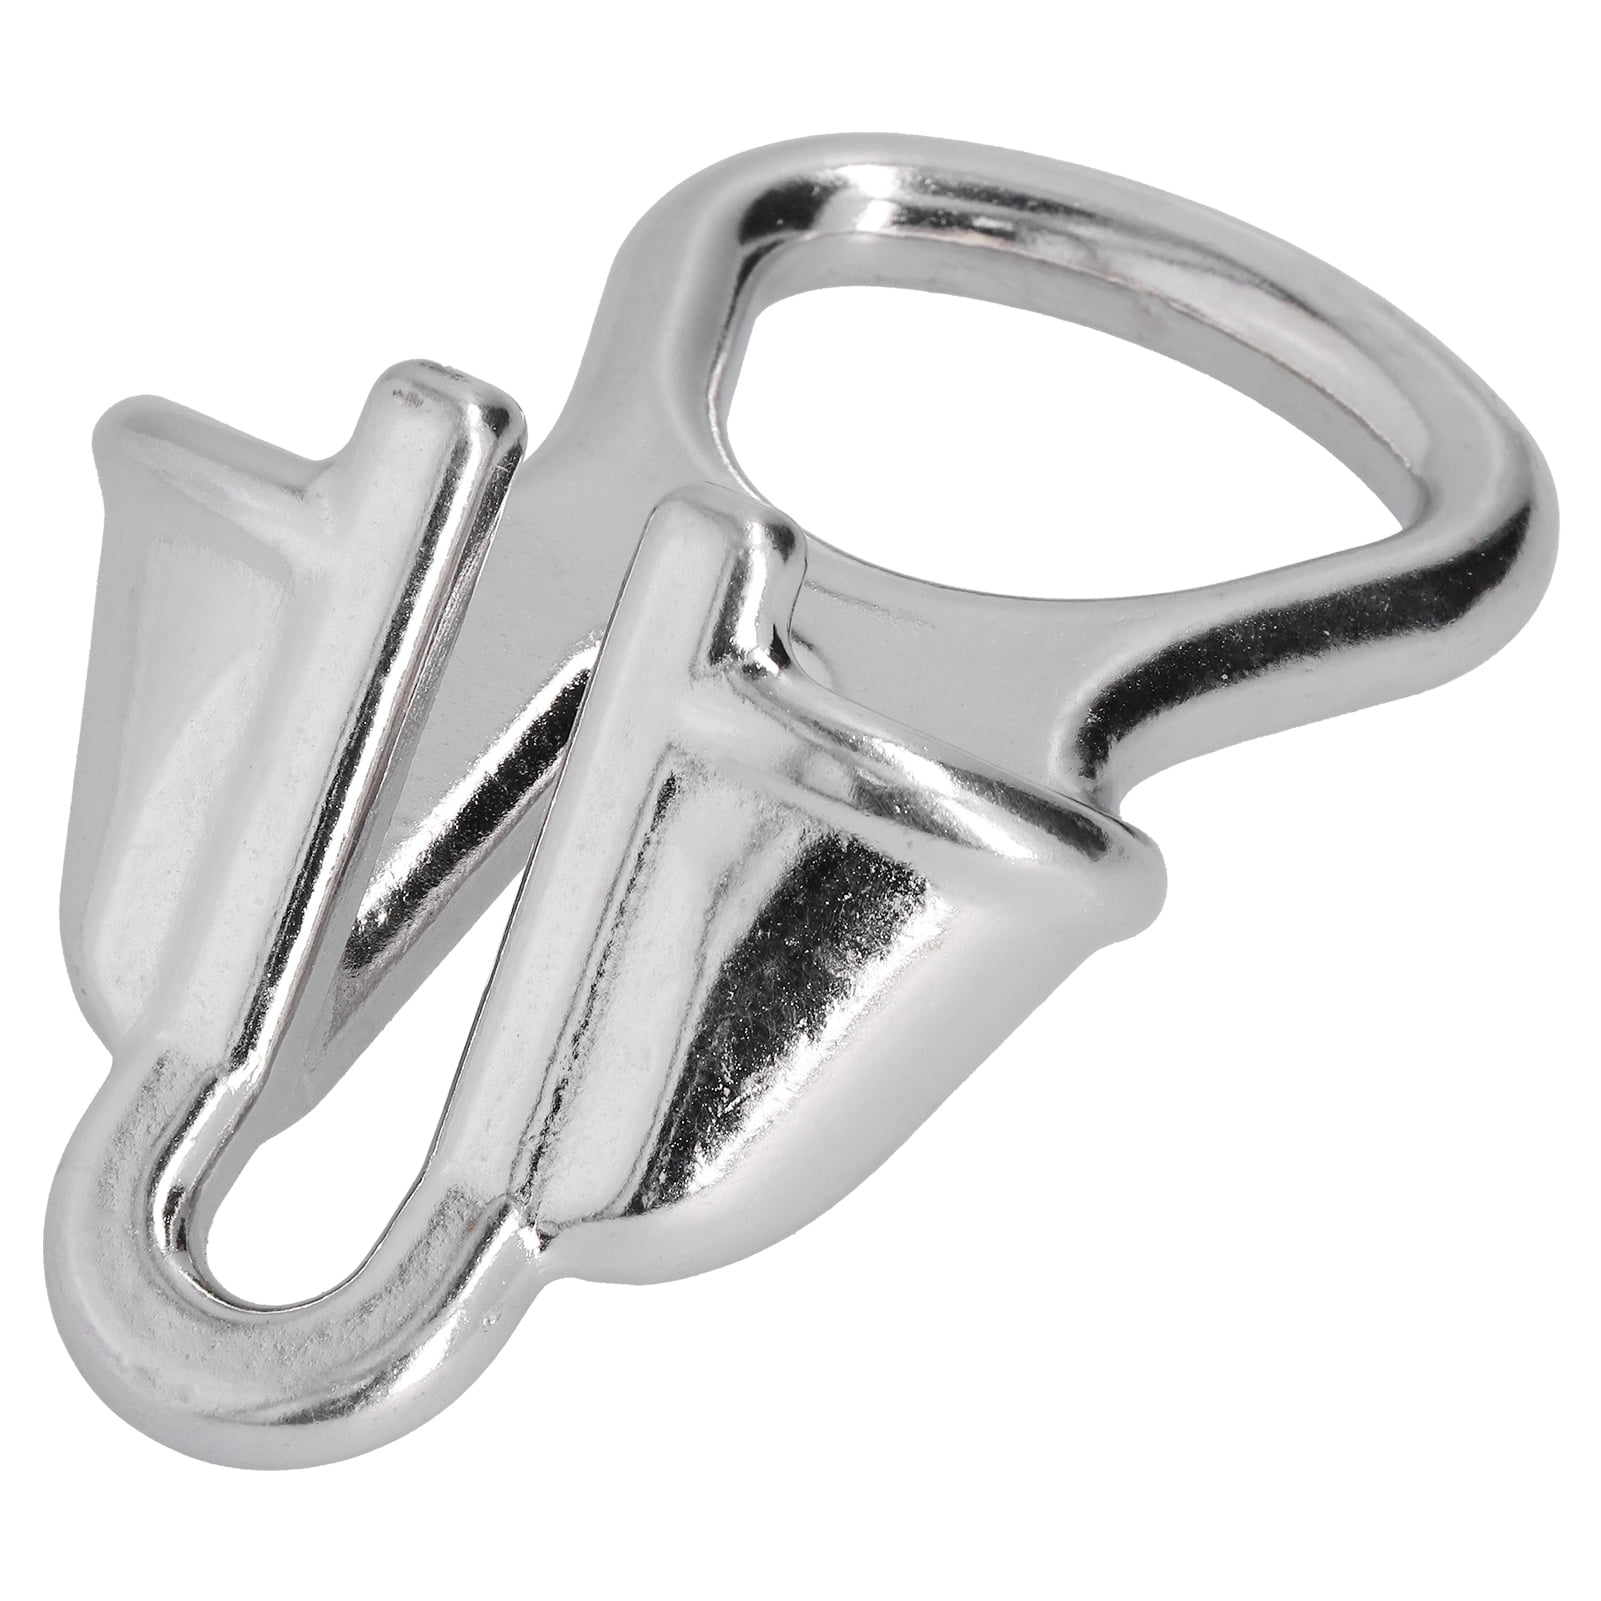 Marine Grade Stainless Steel Boat Hook Ring Anchor Chain Lock Anti-rust 